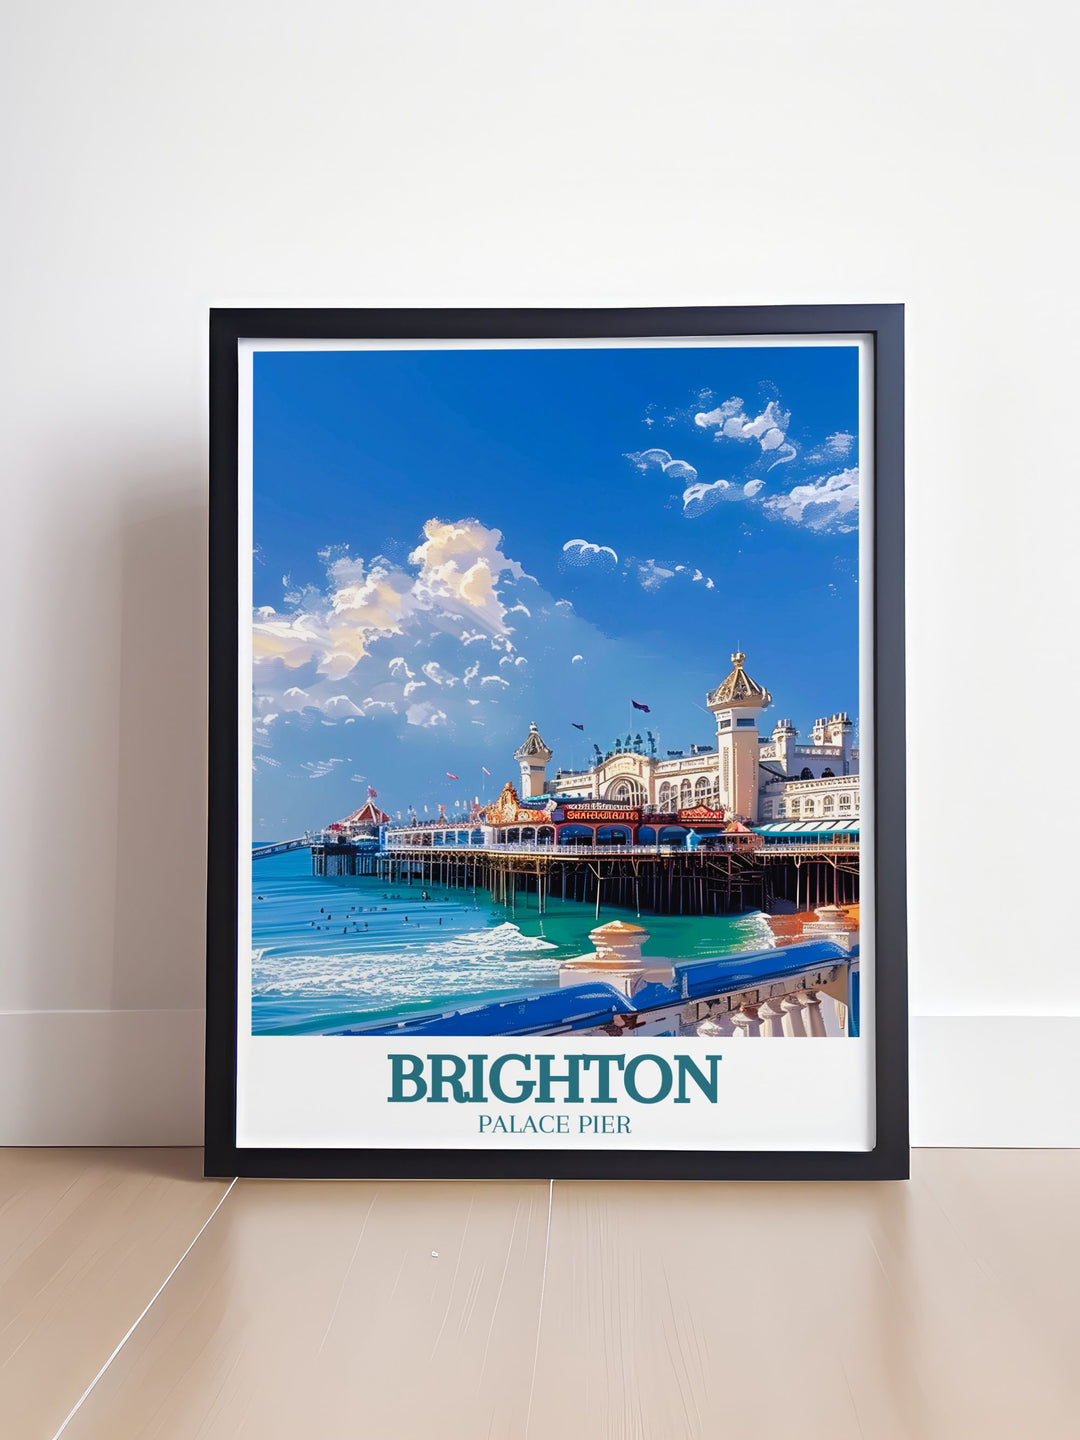 English Channel Travel Poster showcasing the vibrant Brighton Beach and its bustling pier an illustration print that captures the coastal beauty and nostalgic charm of Brighton England perfect for any room.